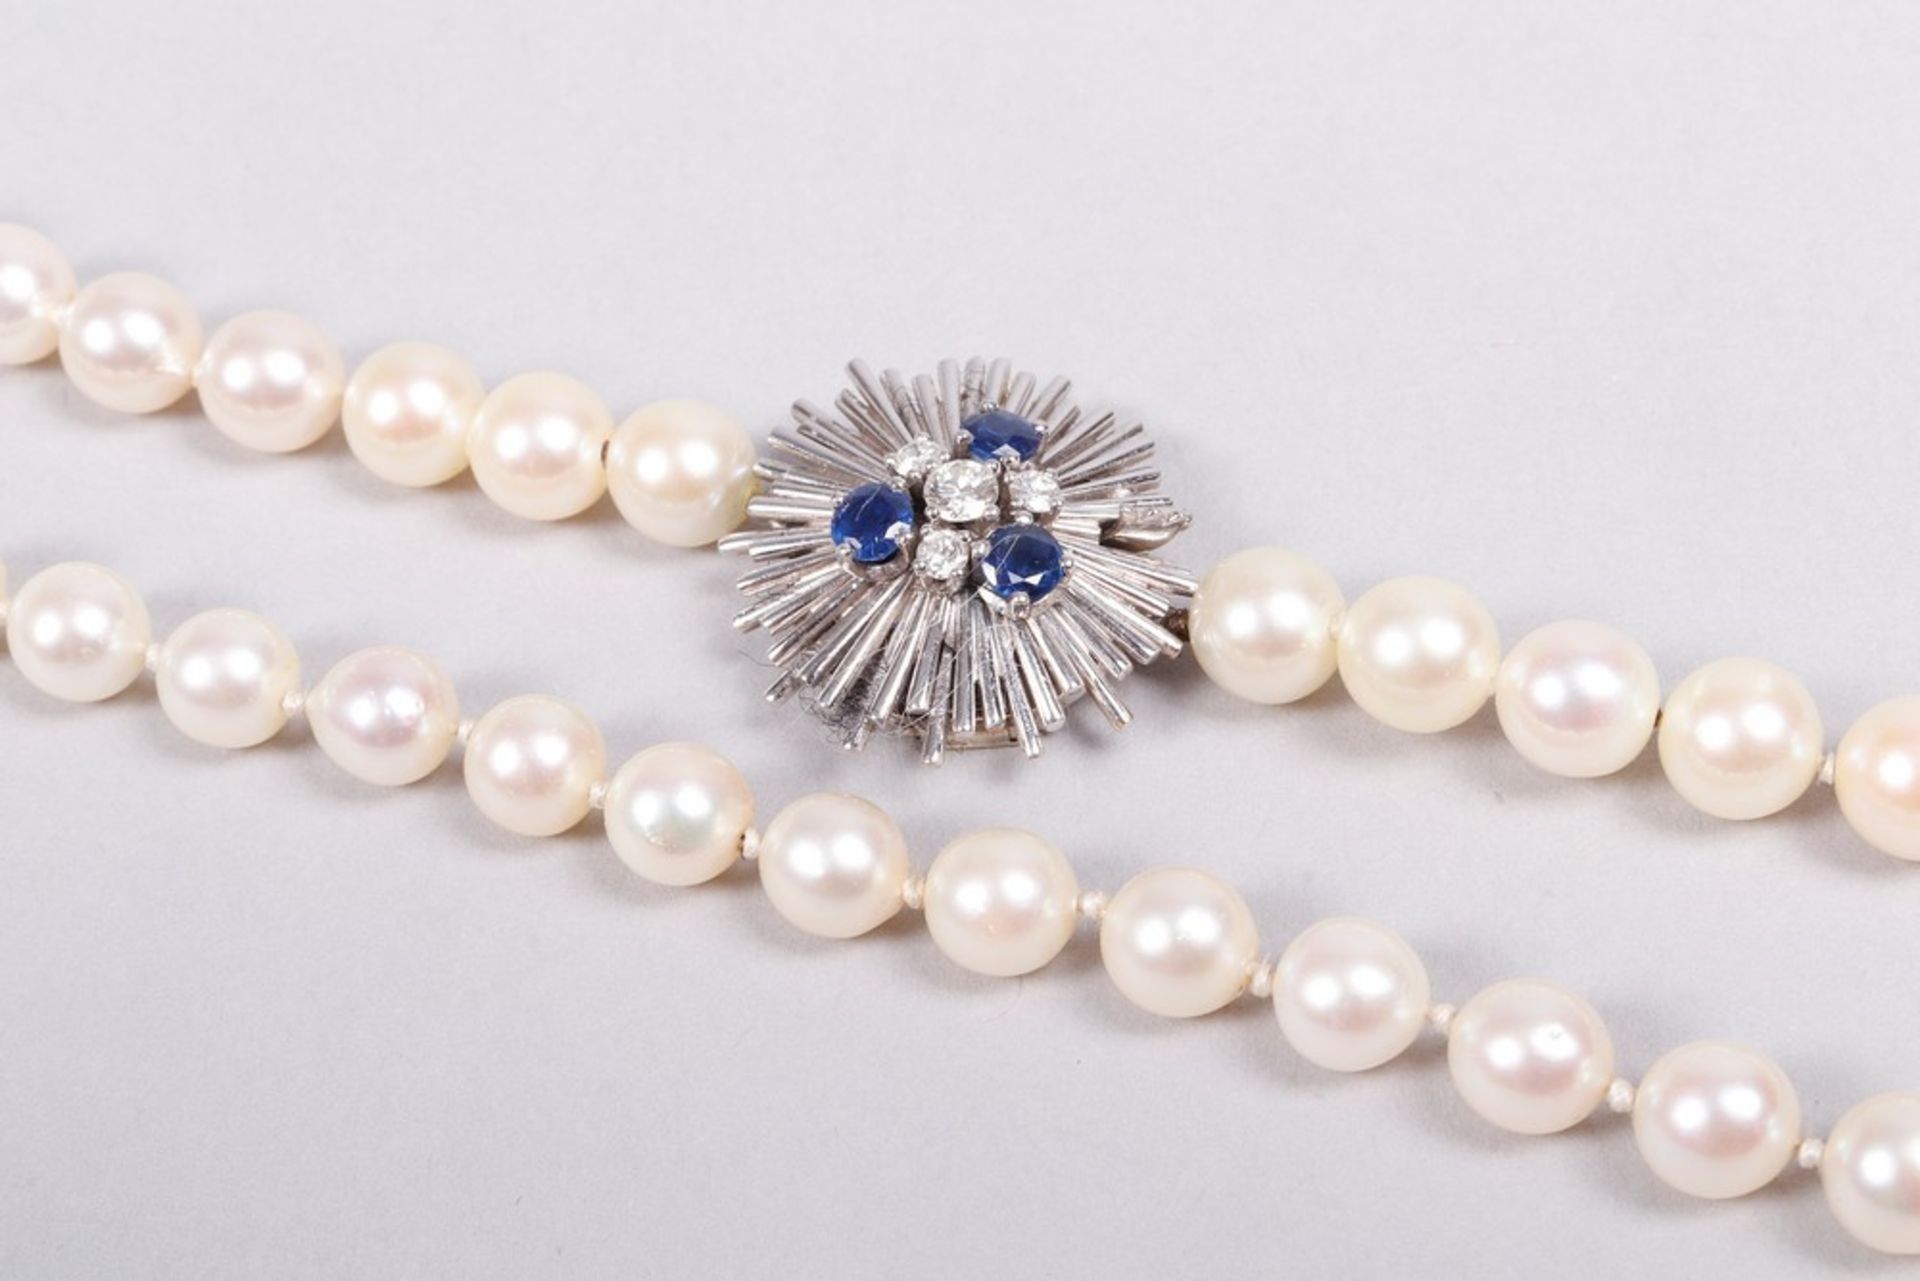 Pearl necklace, 750 WG clasp - Image 2 of 4